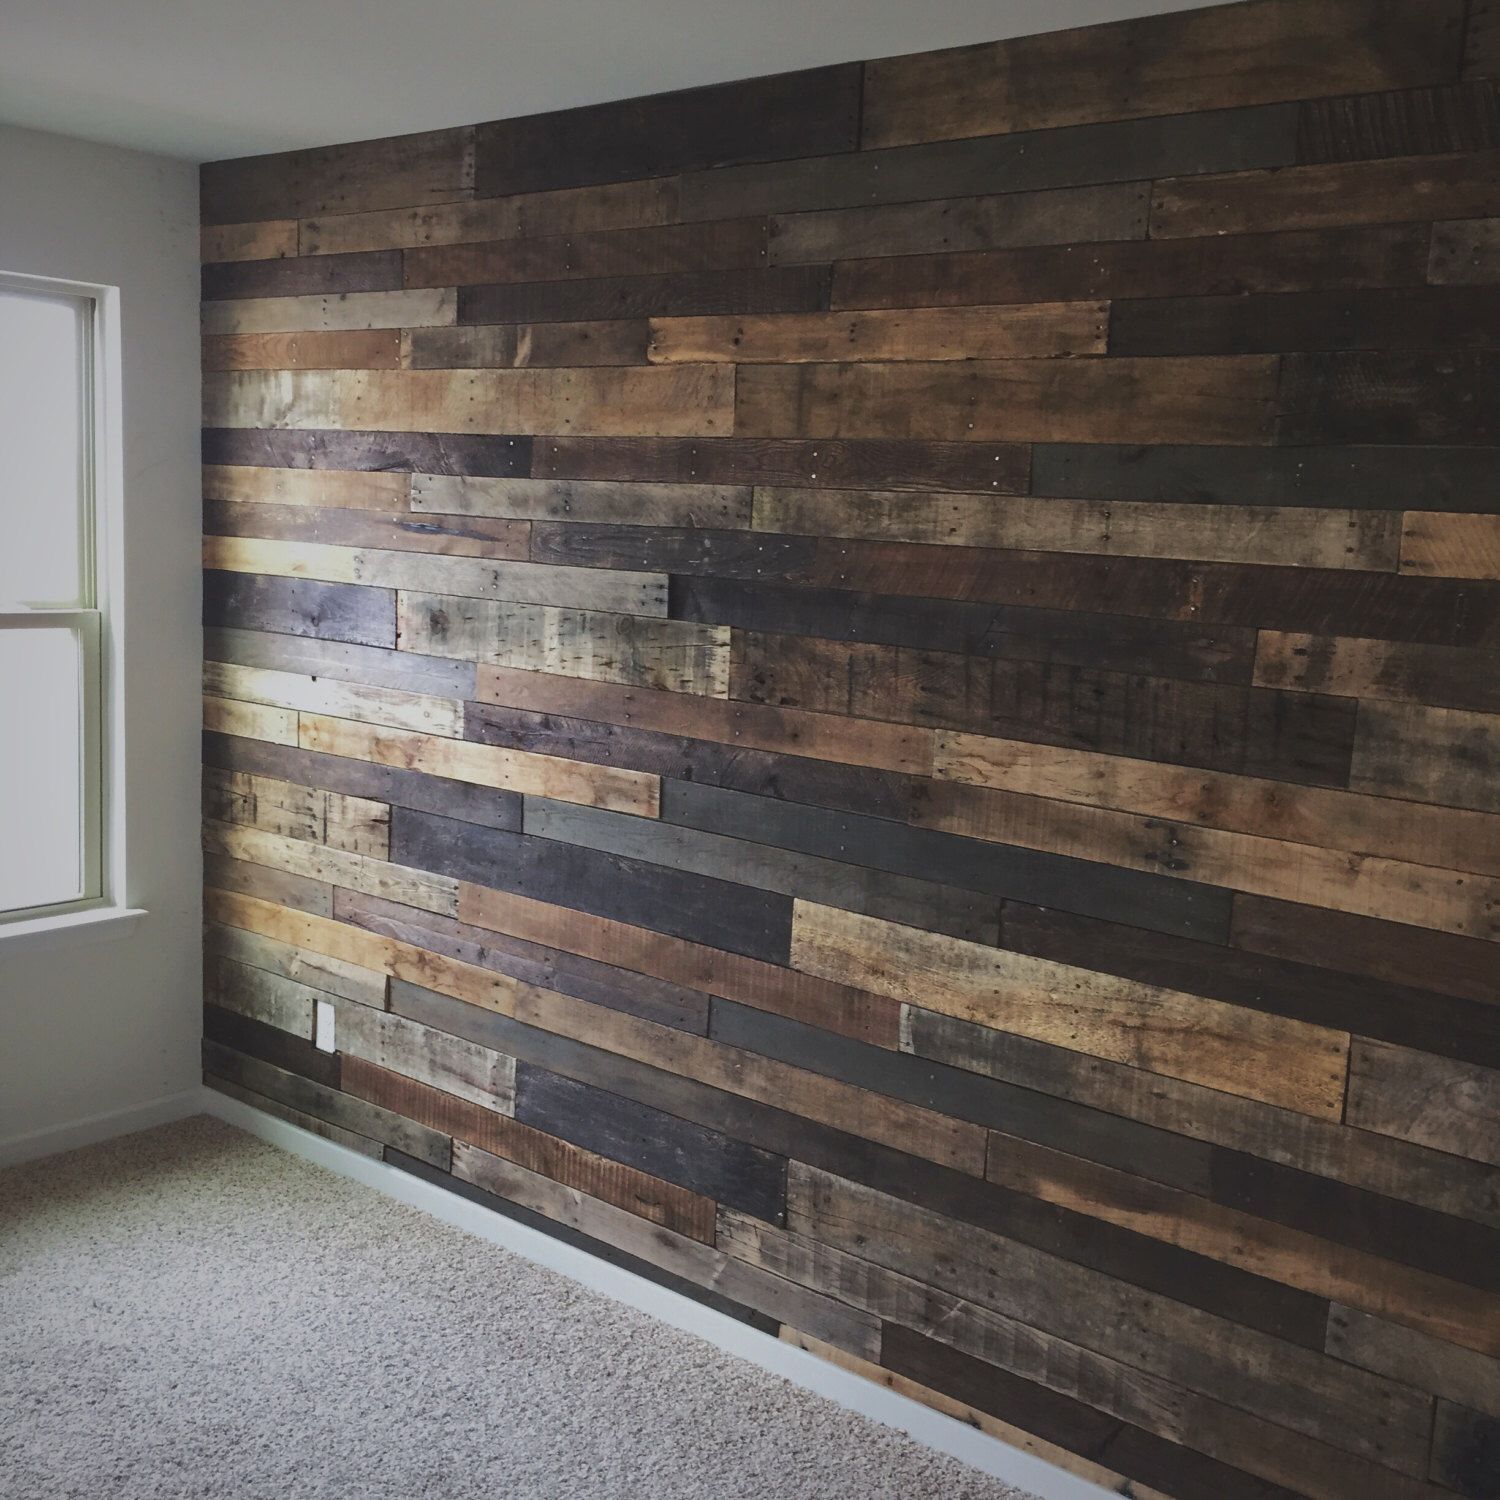 Reclaimed Pallet Wood Wall by crtcreative on Etsy www.etsy.com/…